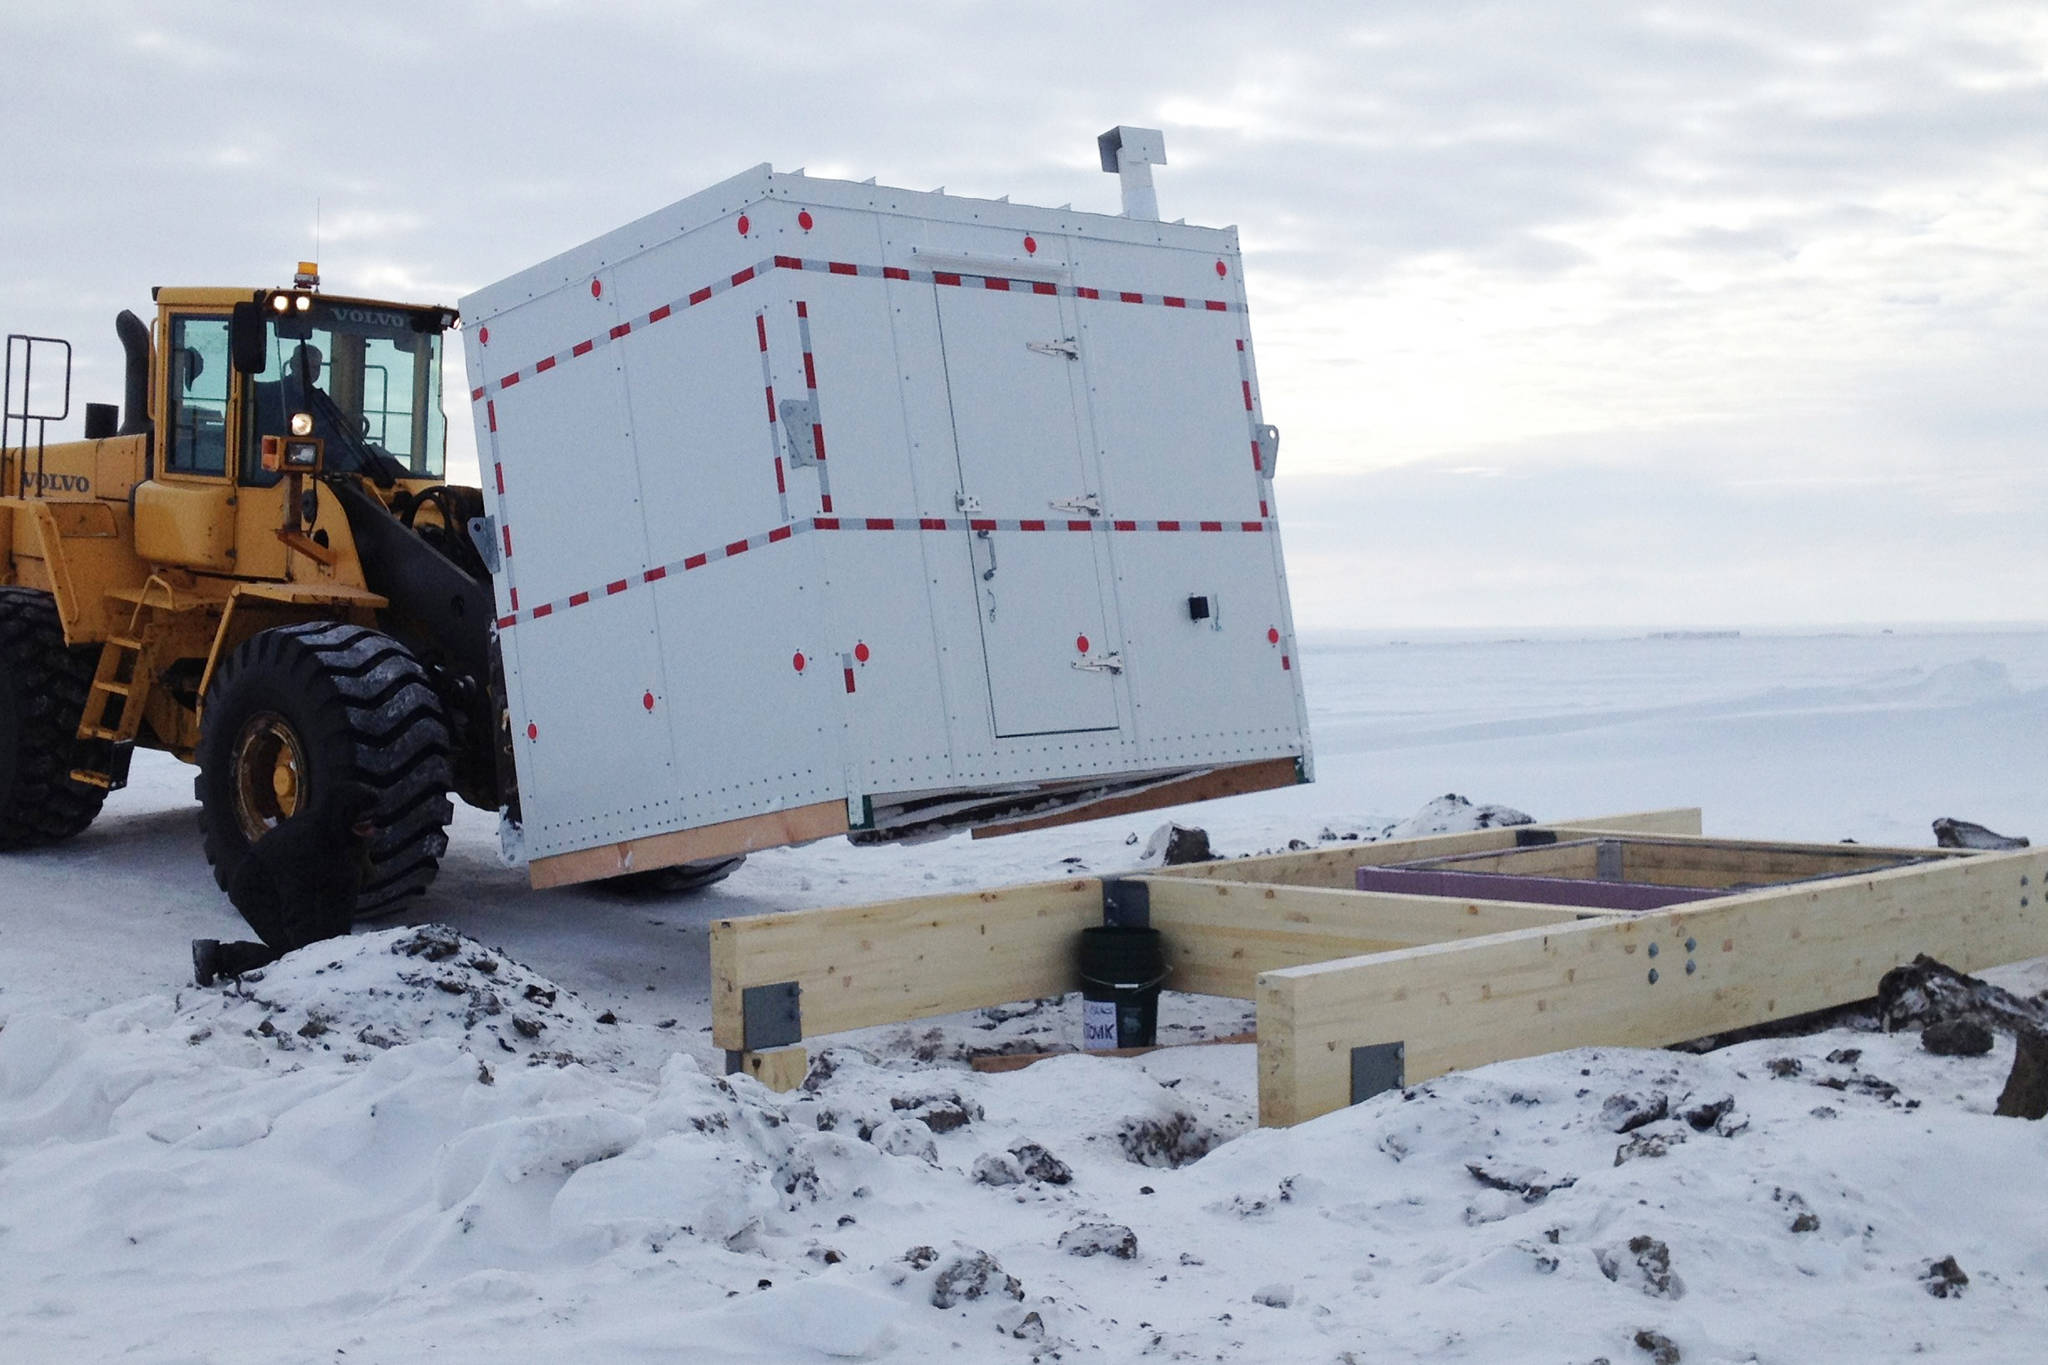 This undated photo in Kaktovik, Alaska, shows installation of a shelter covering the entrance to a new community ice cellar, a type of underground food cache dug into the permafrost to provide natural refrigeration used for generations in far-north communities. Naturally cooled underground ice cellars, used in Alaska Native communities for generations, are becoming increasingly unreliable as a warming climate and other factors touch multiple facets of life in the far north. (Marnie Isaacs/Kaktovik Community Foundation via AP)